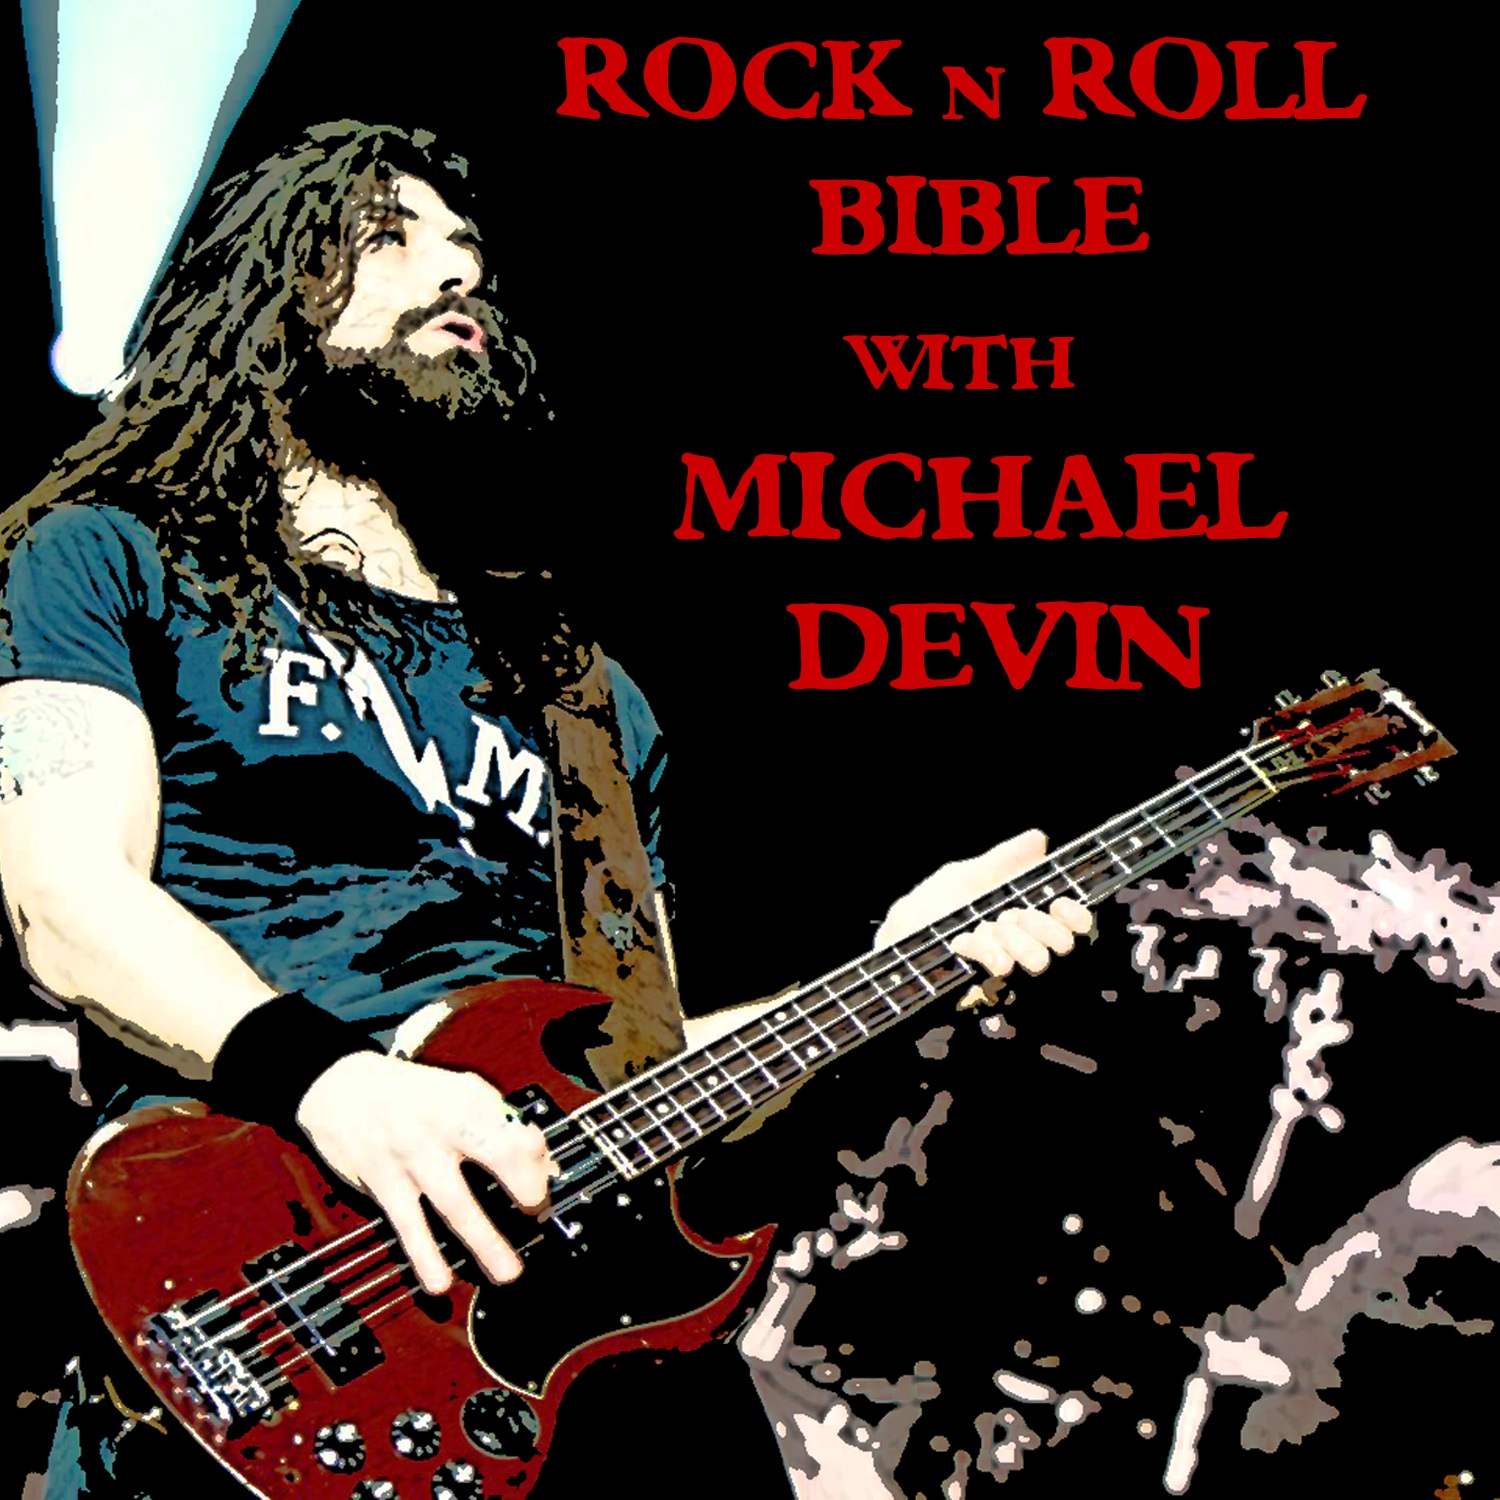 Rock n Roll Bible with Michael Devin